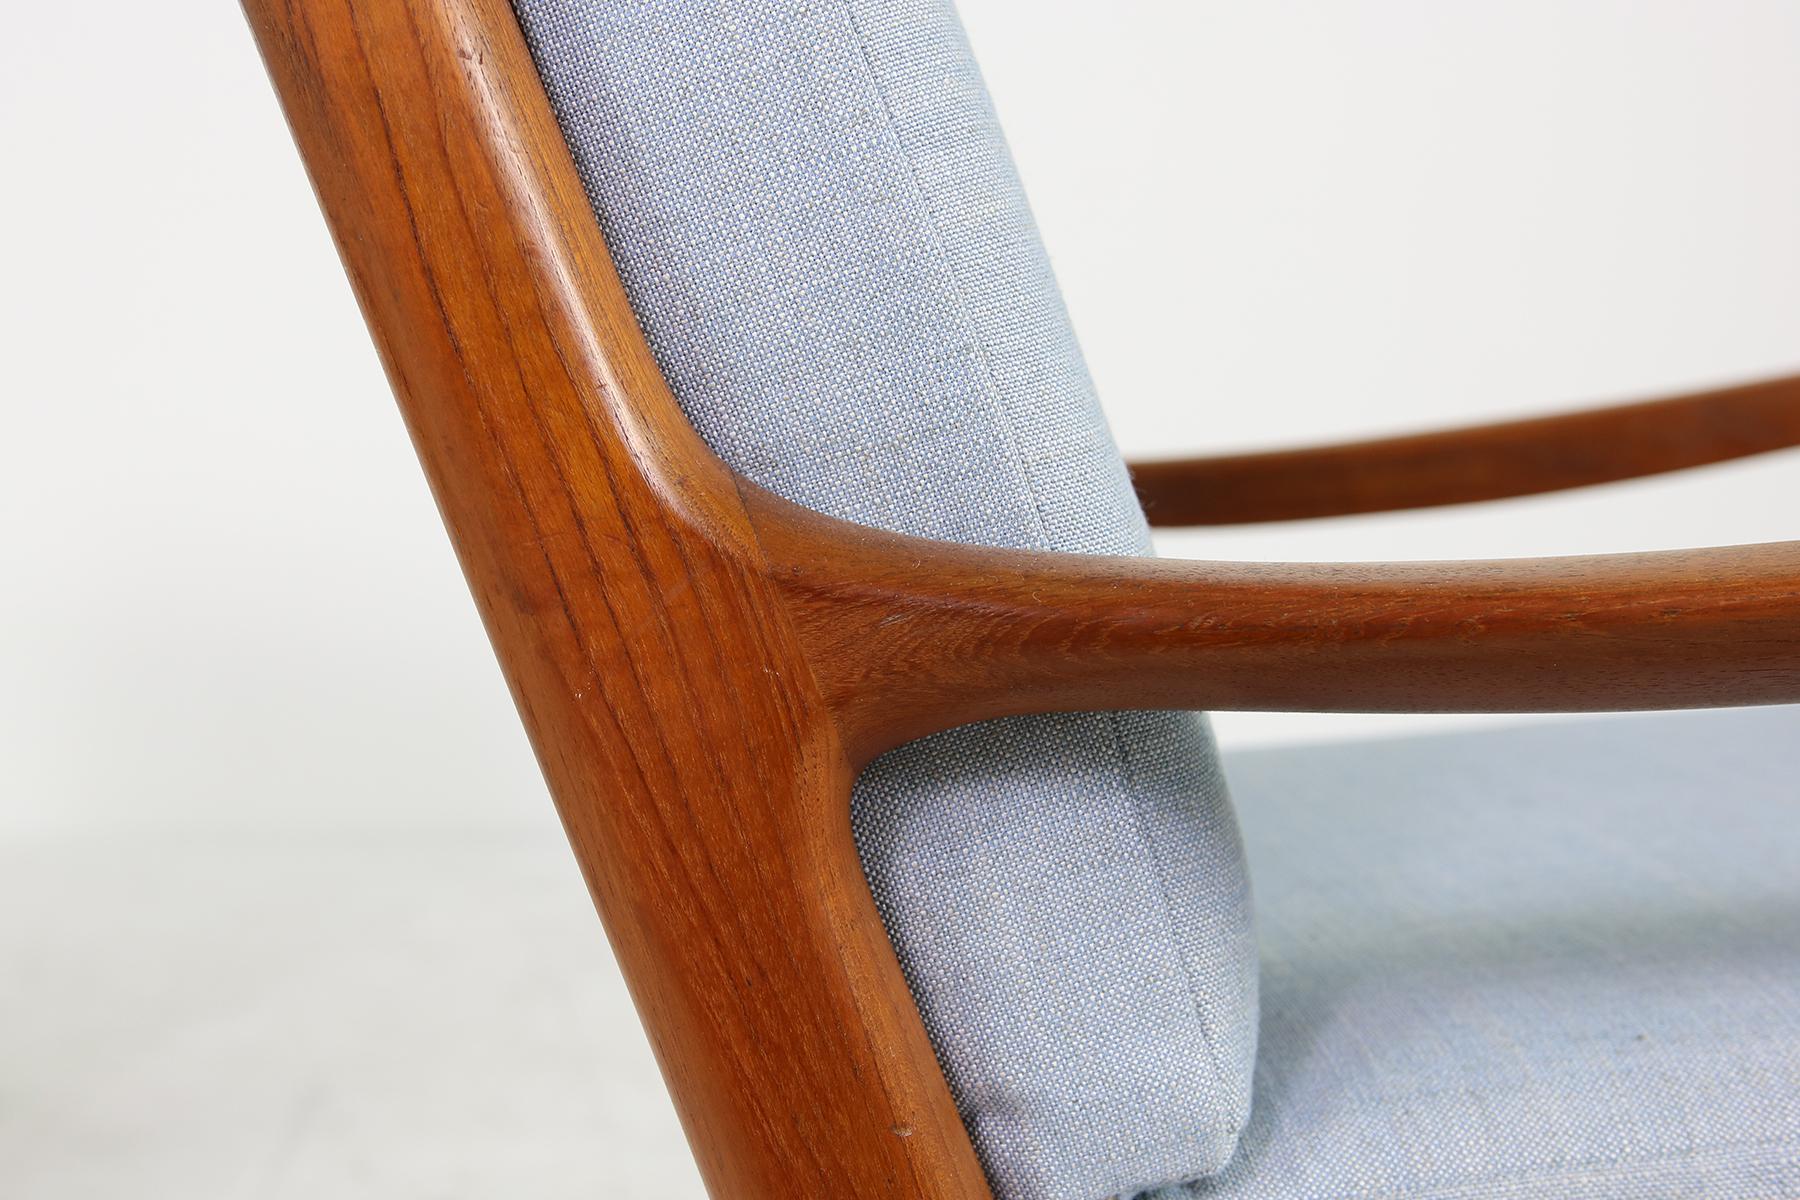 Beautiful pair of 1960s Danish modern Ole Wanscher easy chairs, senator series in Teak. New upholstery in high quality woven fabric, in grey. Overall a fantastic condition. Made by France & Son, Denmark.